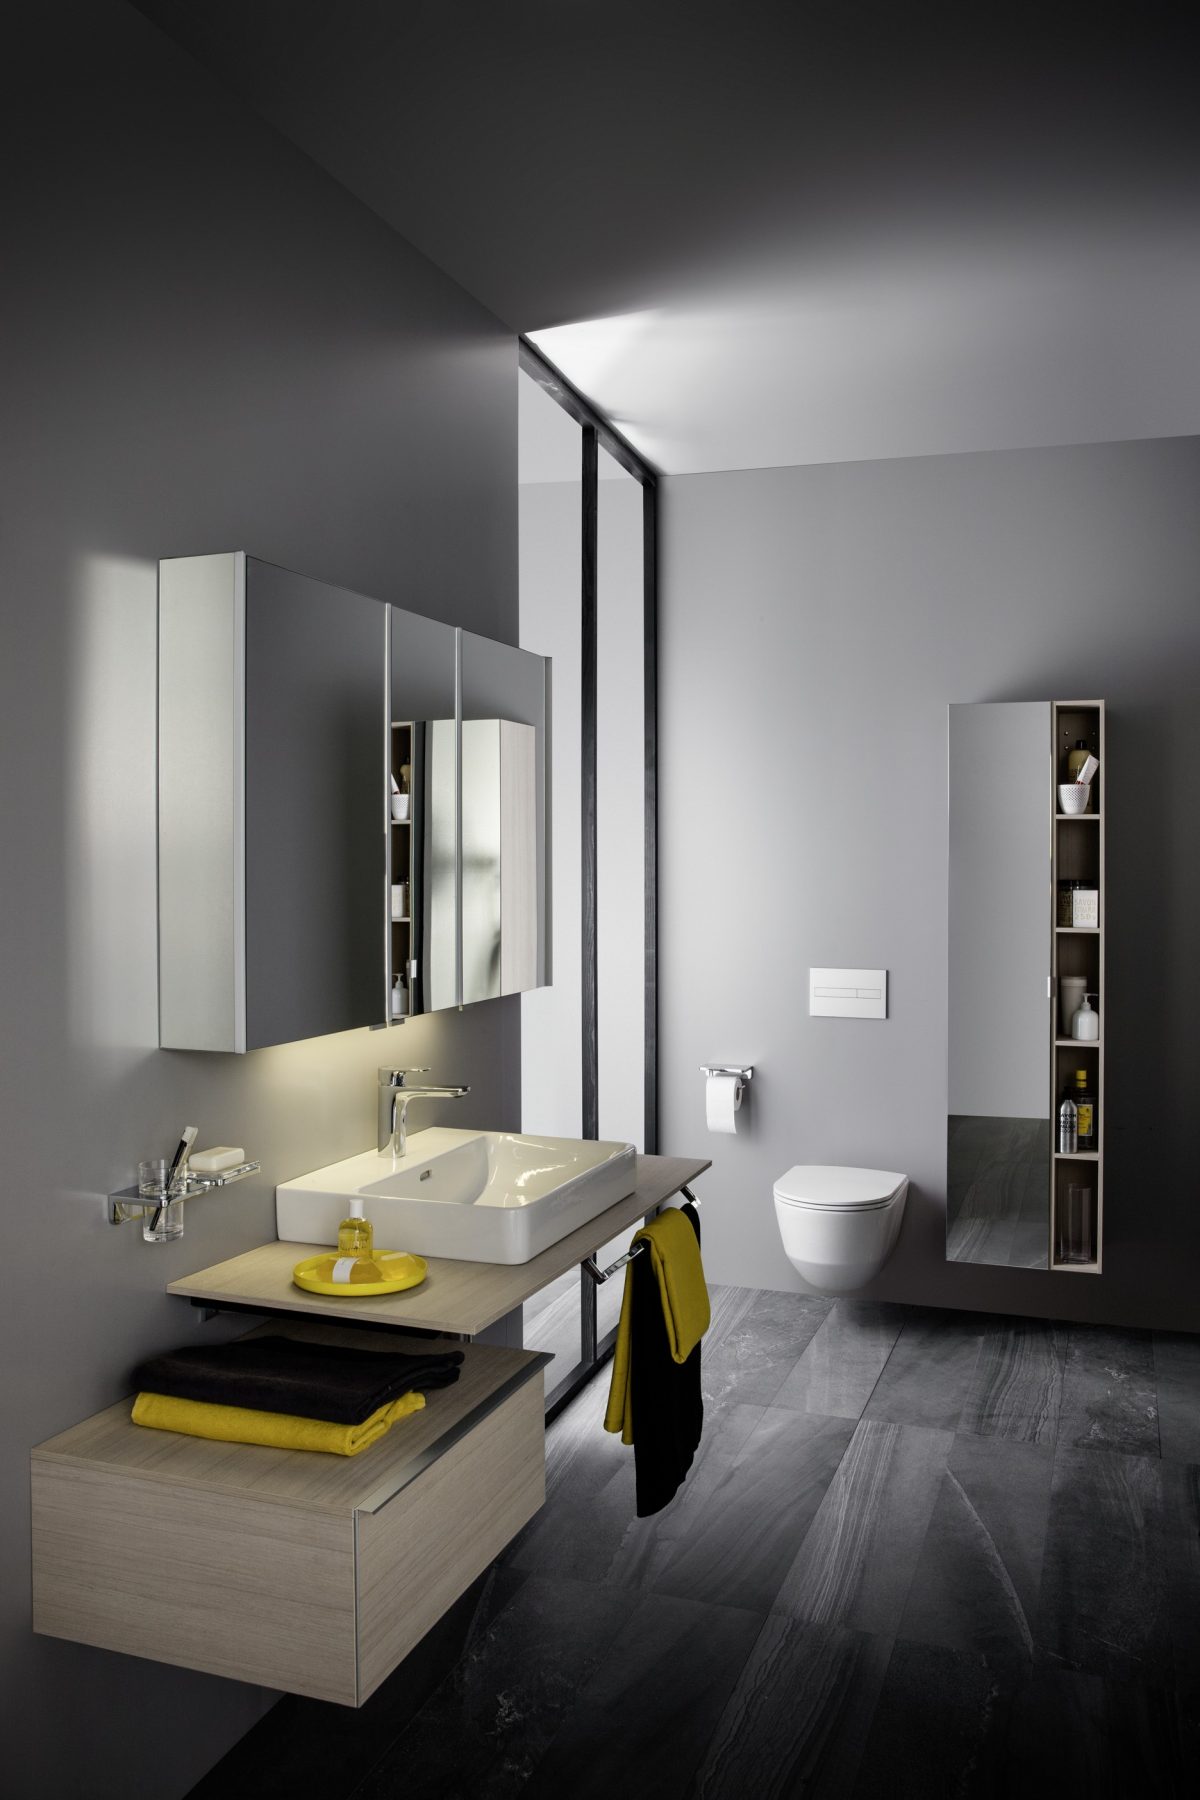 Luxury bathroom style with dark grey walls and flooring with yellow and black items.